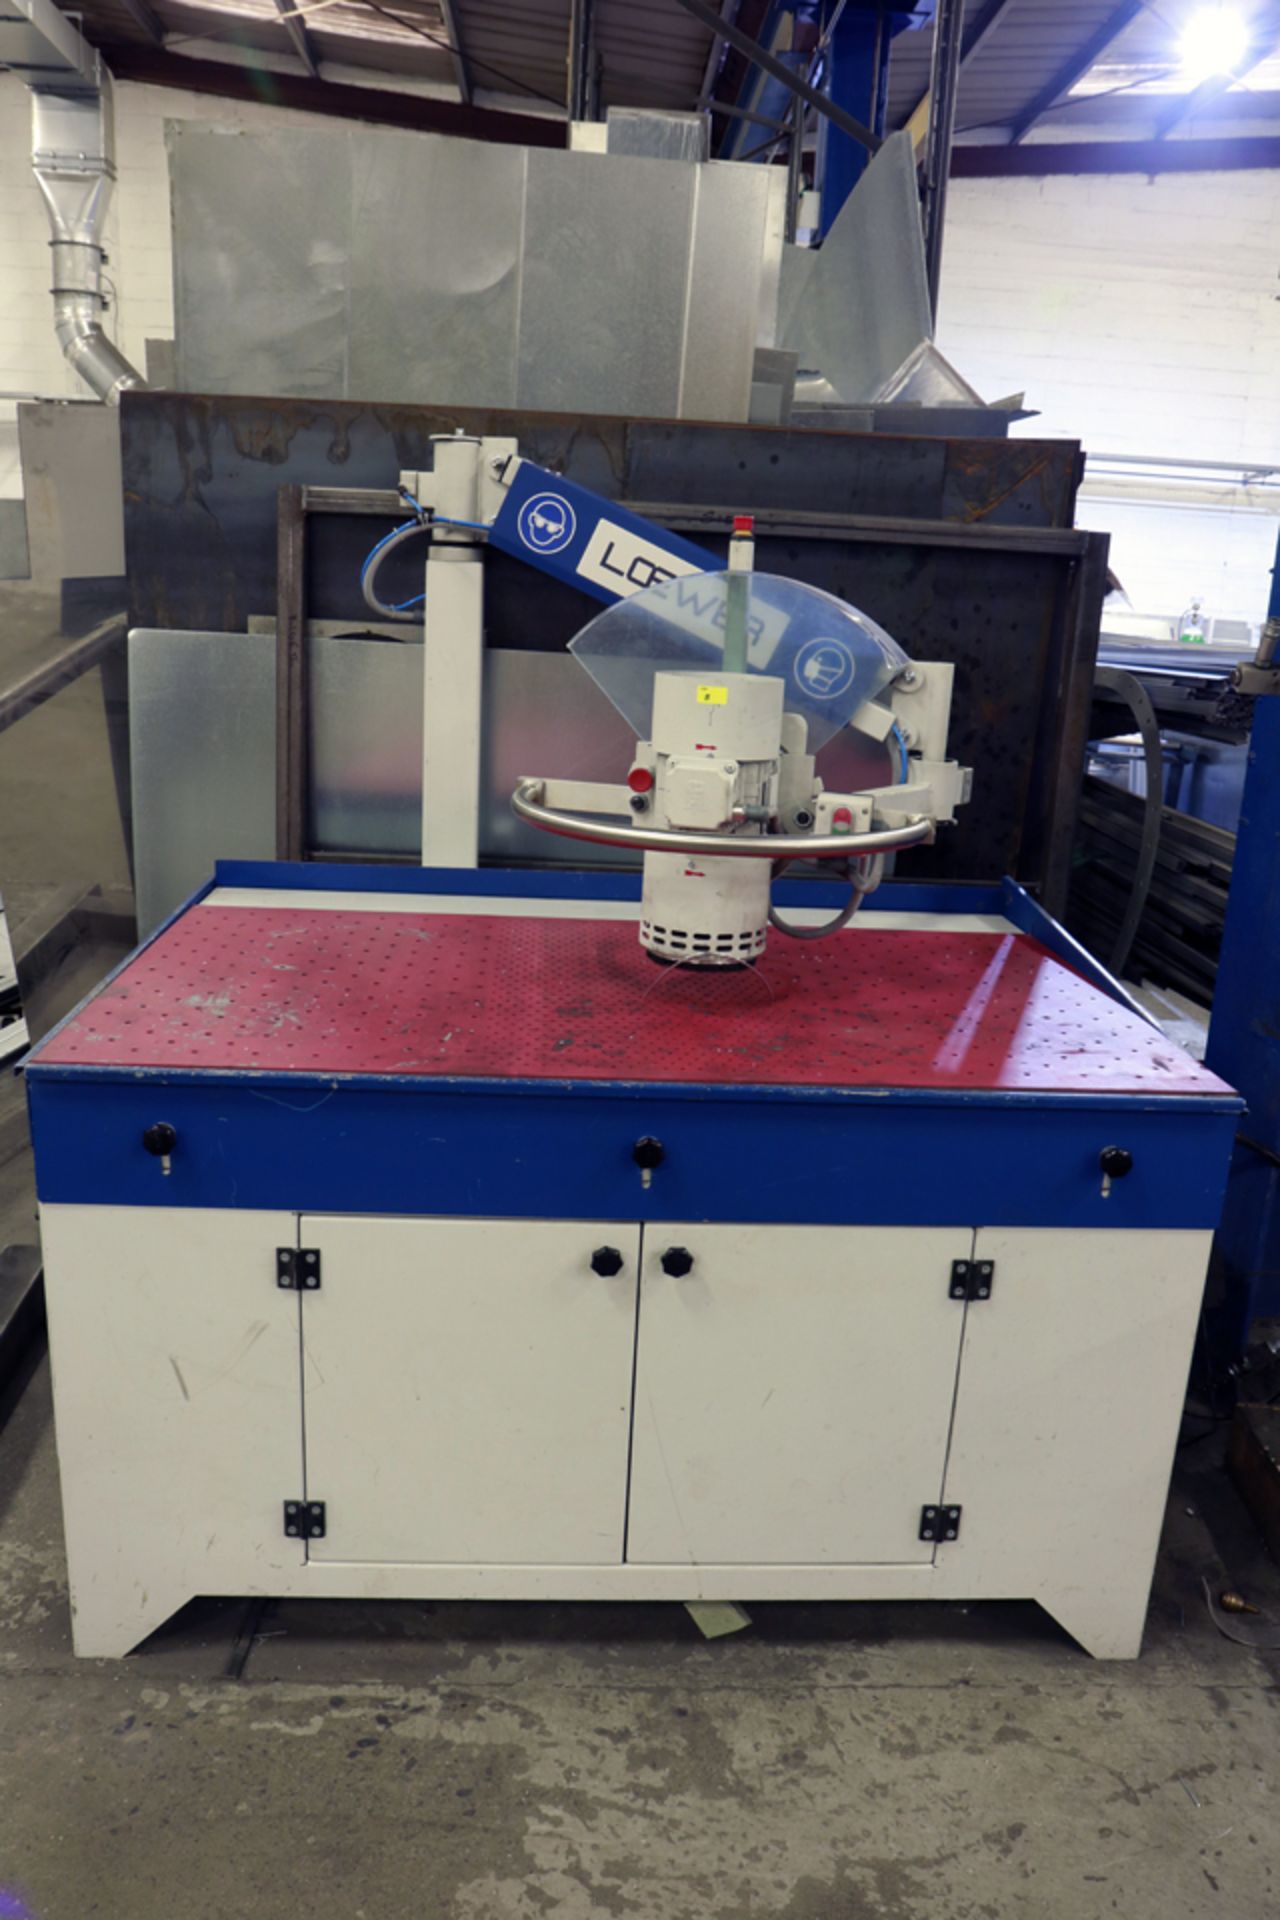 Loewer SWG Swing Arm Grinder with Downdraught Table